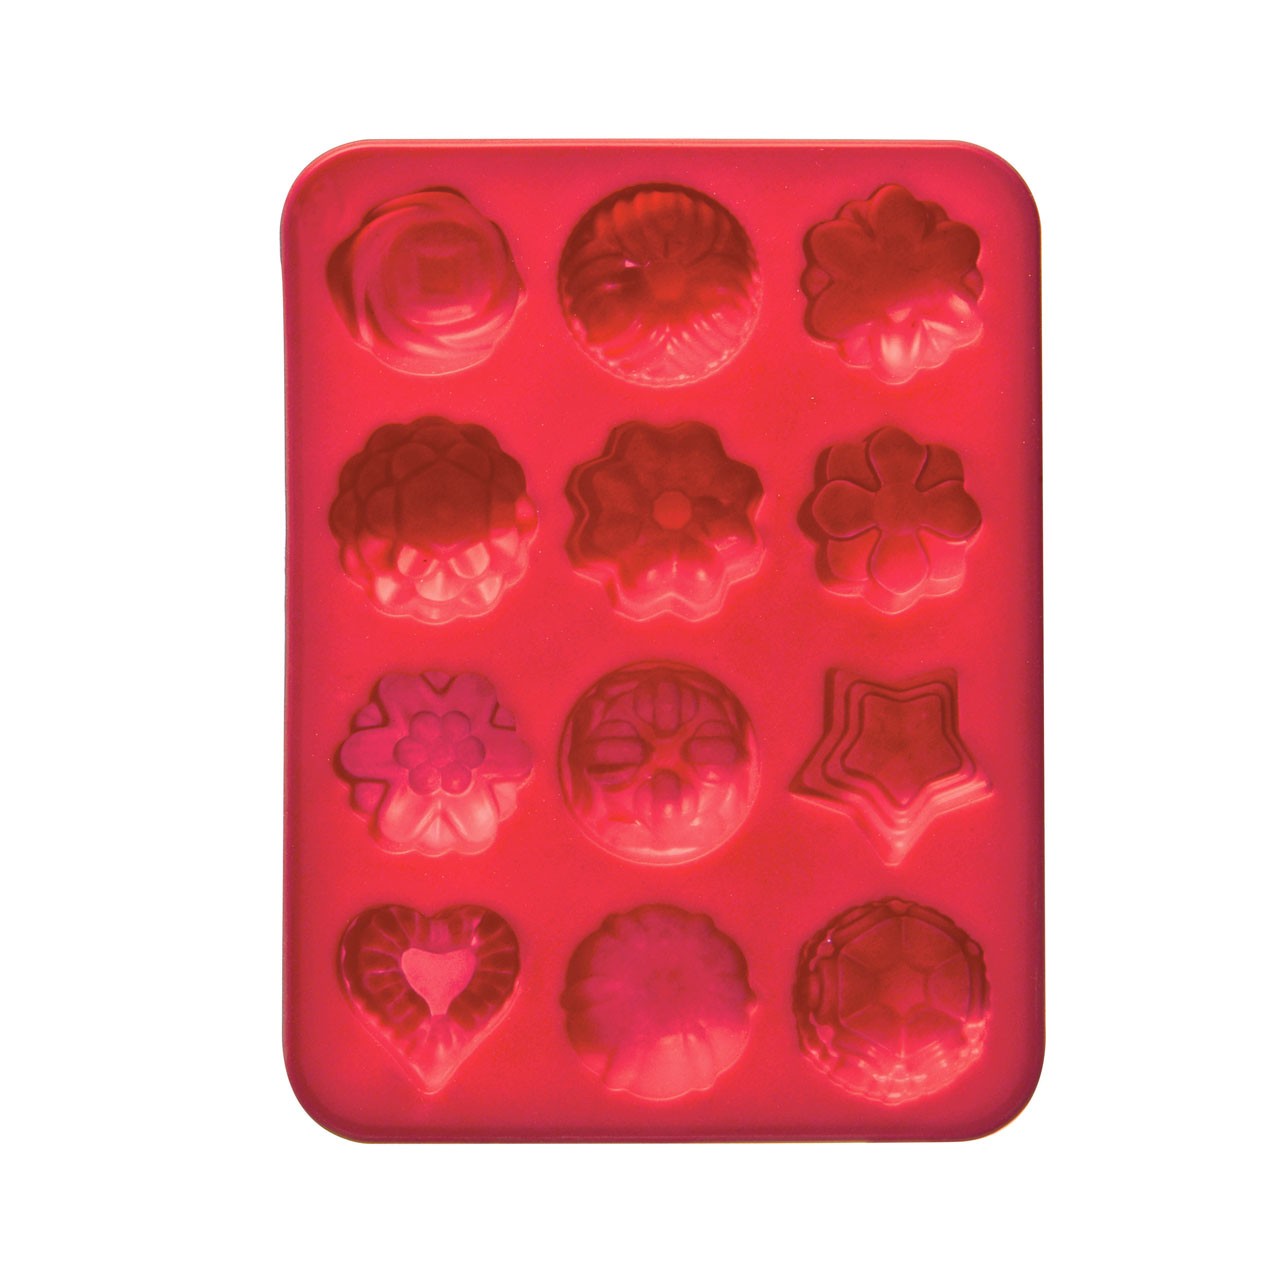 12 Flower Cake Mould Tray - Hot Pink